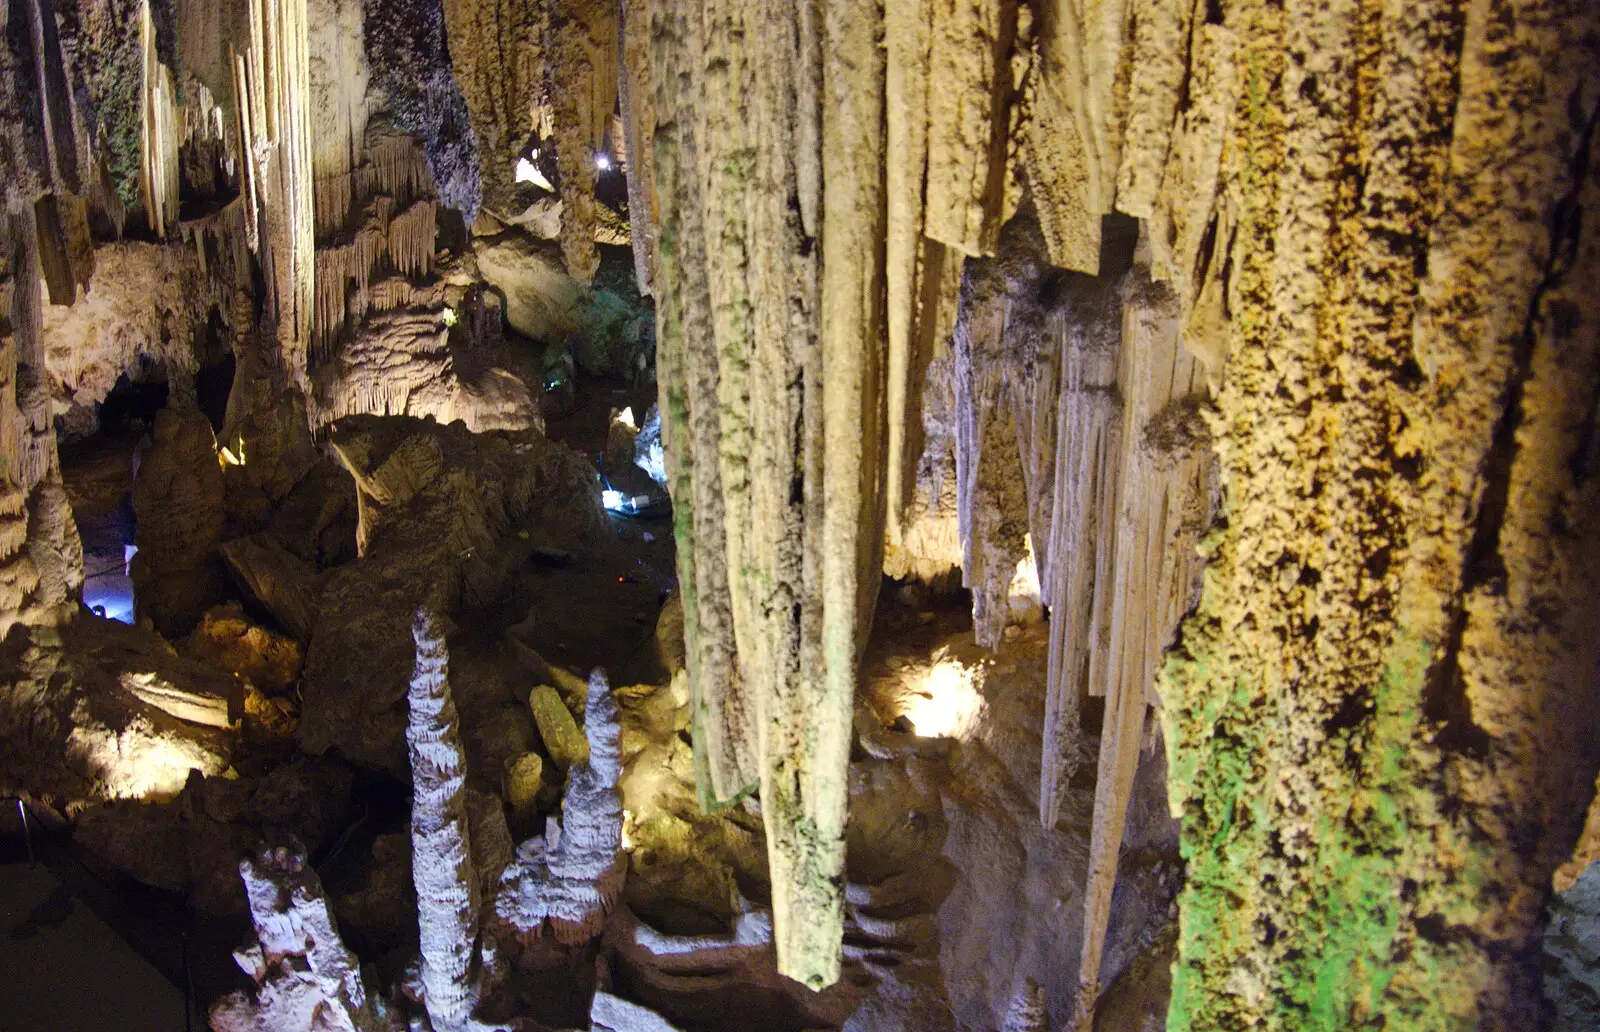 More spiky stalactites, from The Caves of Nerja, and Frigiliana, Andalusia, Spain - 18th April 2019